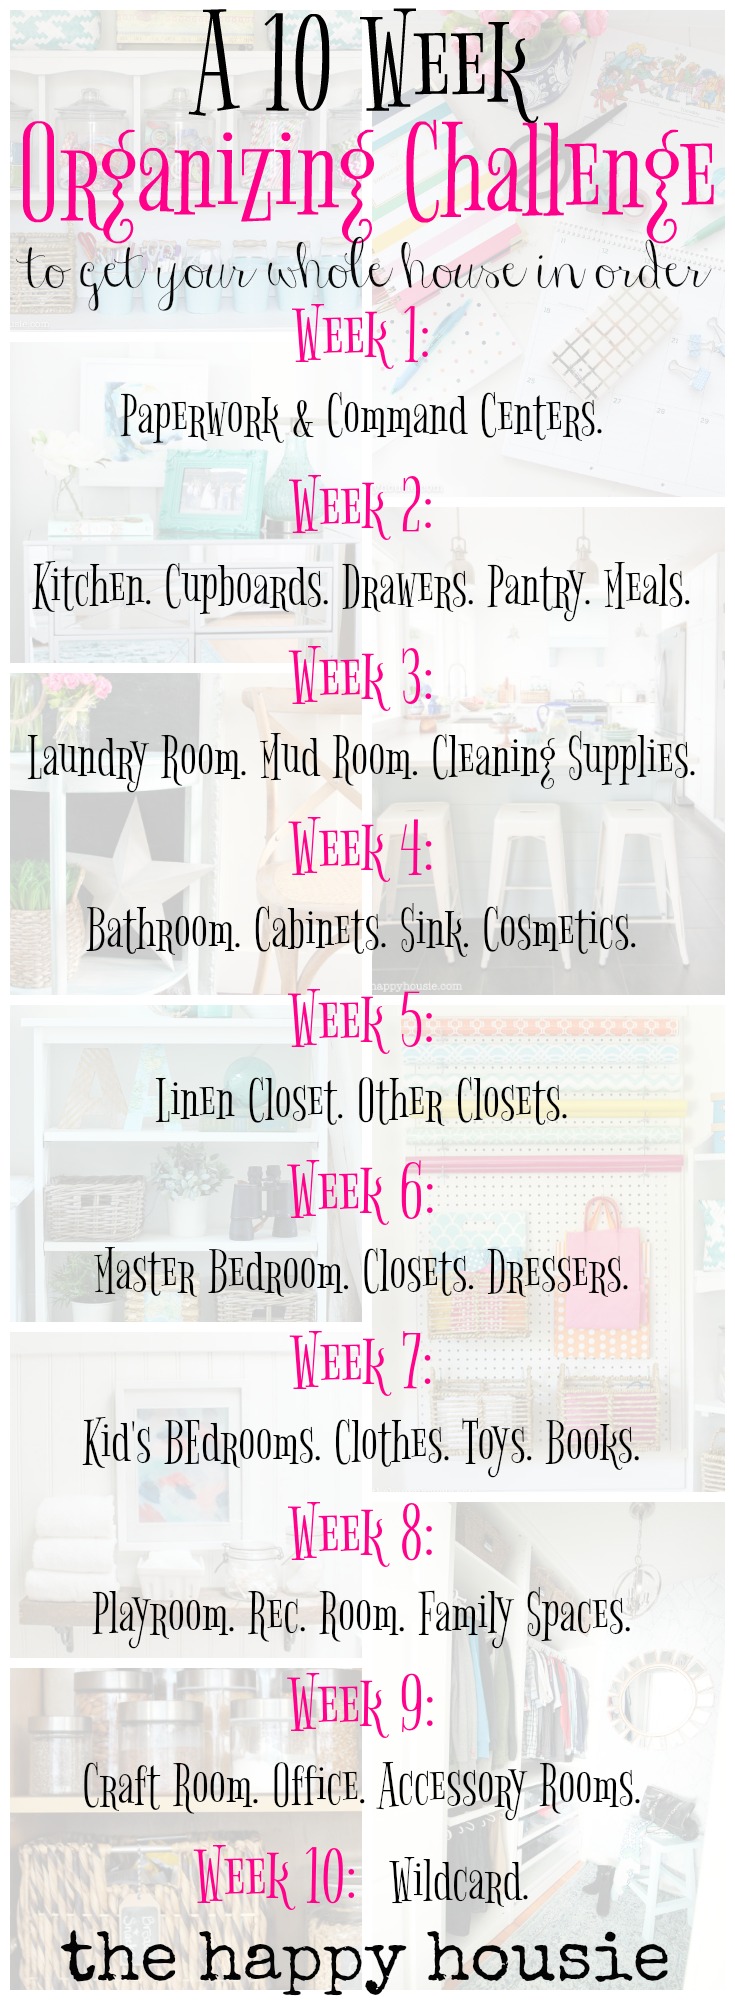 Daily Cleaning Schedule Tips: 6 Daily Cleaning Routine Musts